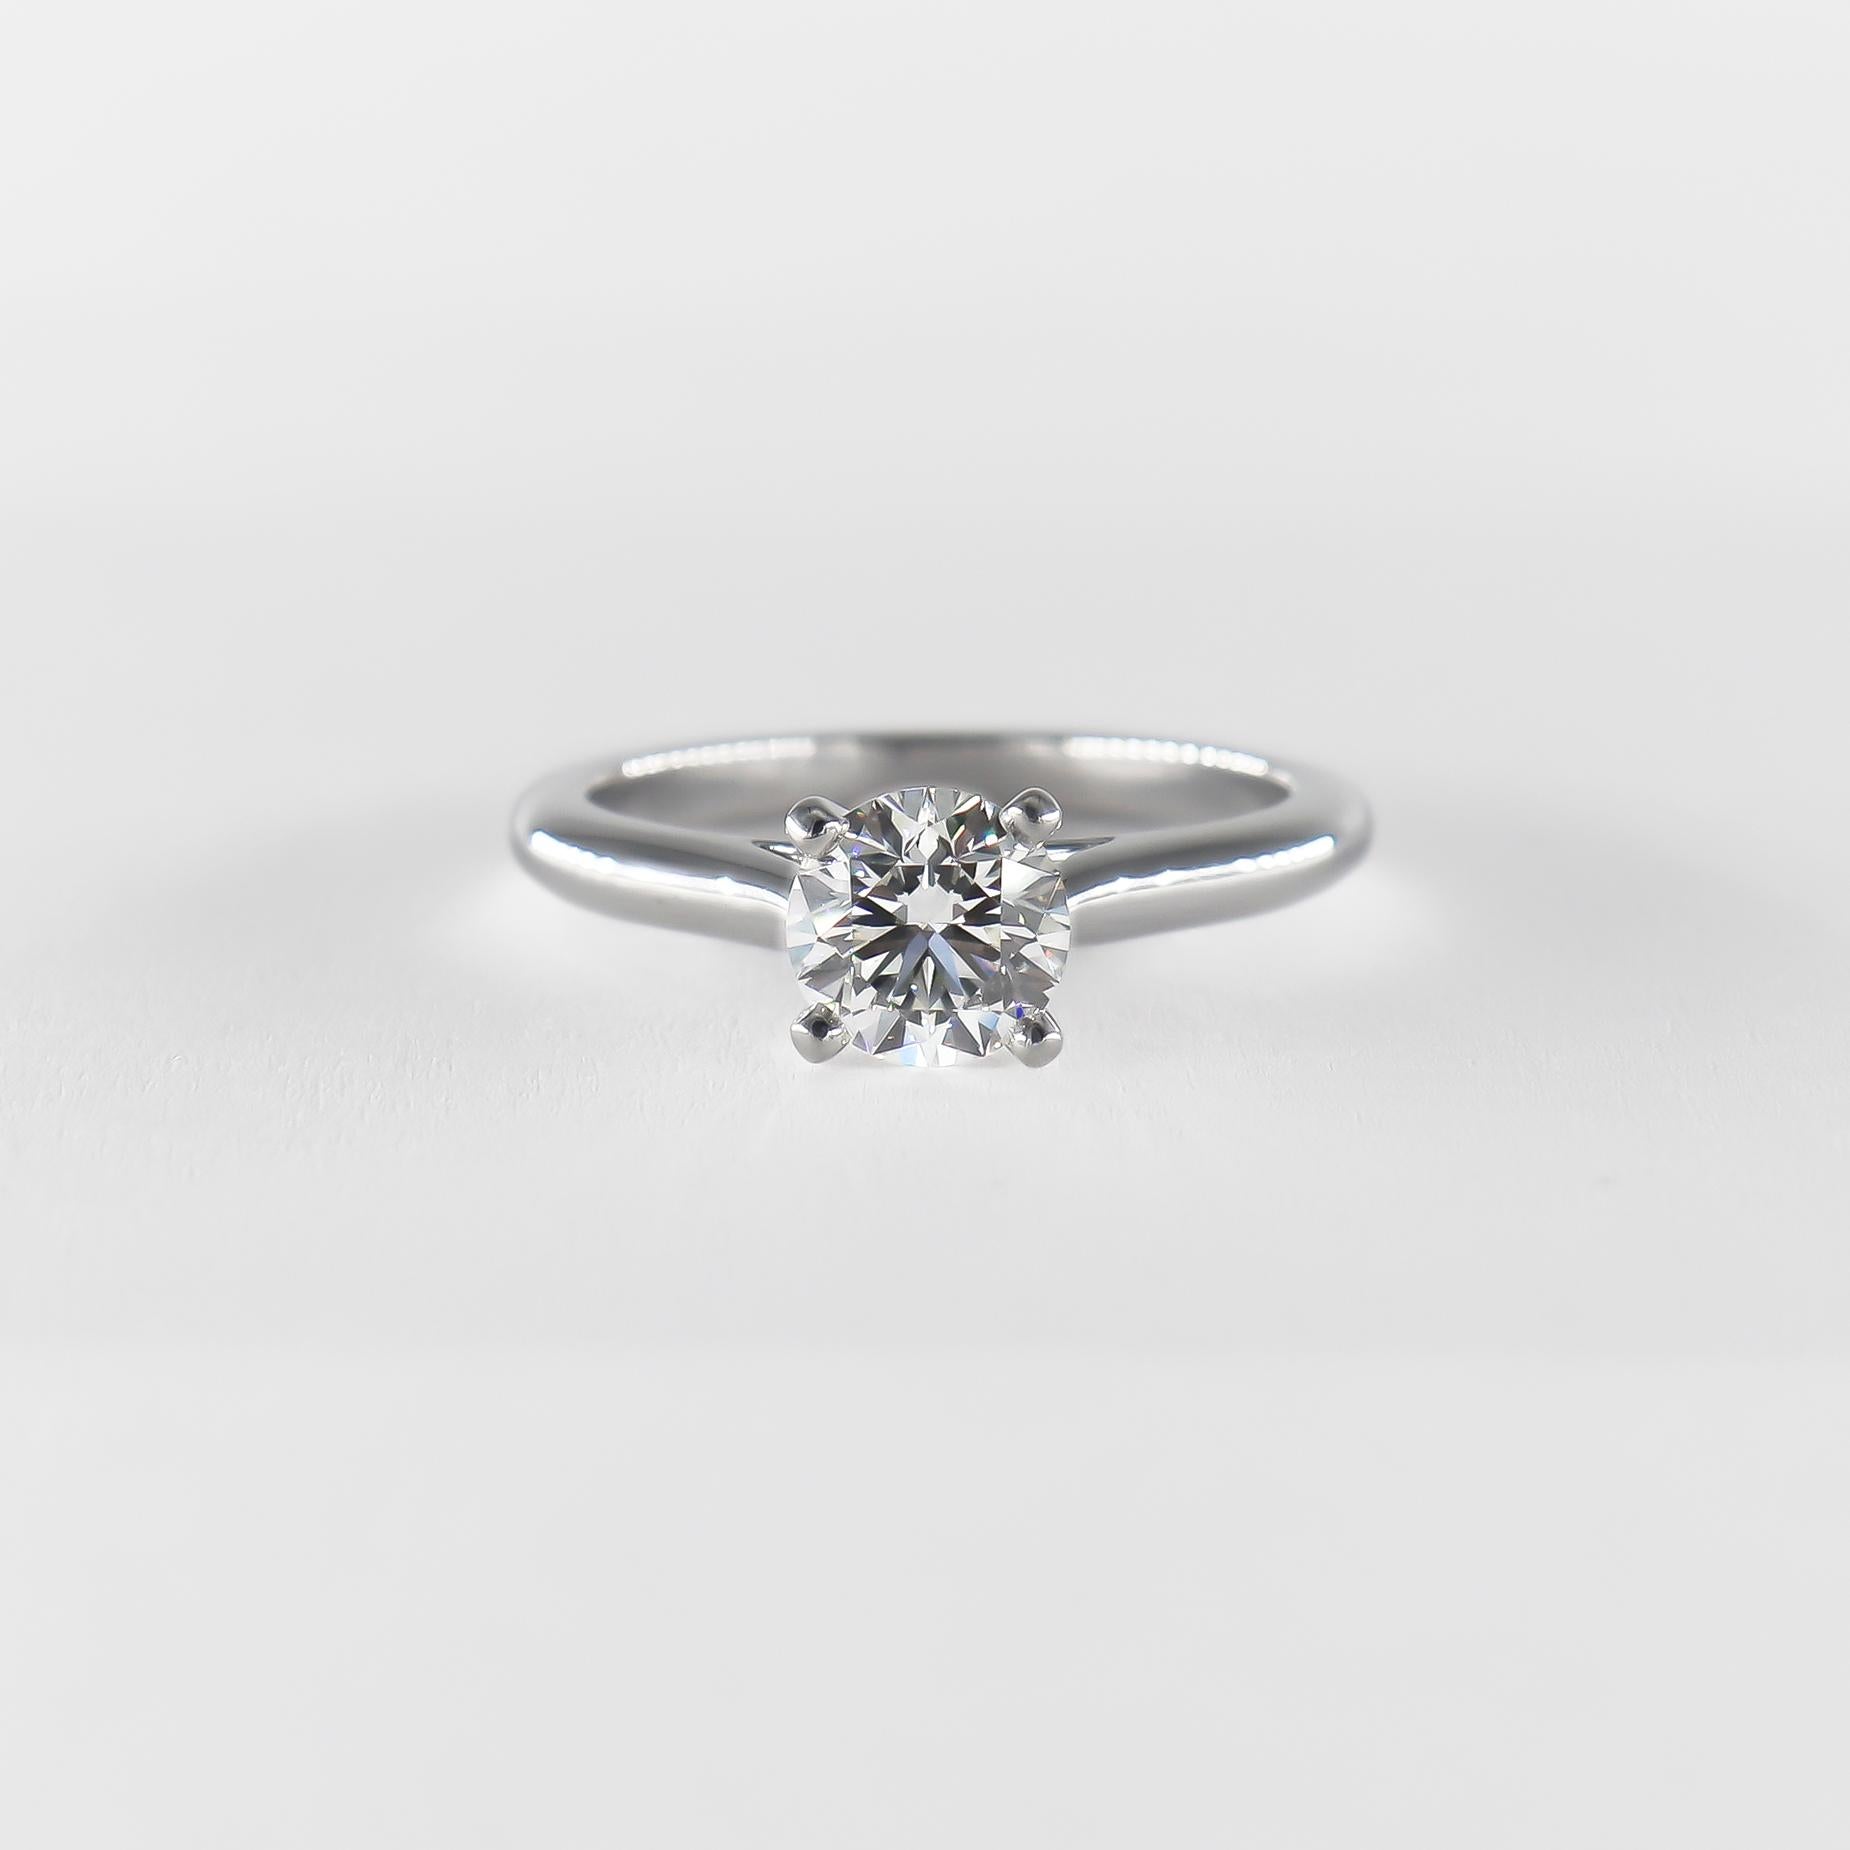 An elegant piece from the house of Cartier, this timeless engagement ring exemplifies Cartier's sophistication and quality. This sleek platinum solitaire features a stunning 1.32 carat round diamond, certified by GIA to be G color and VS1 clarity.